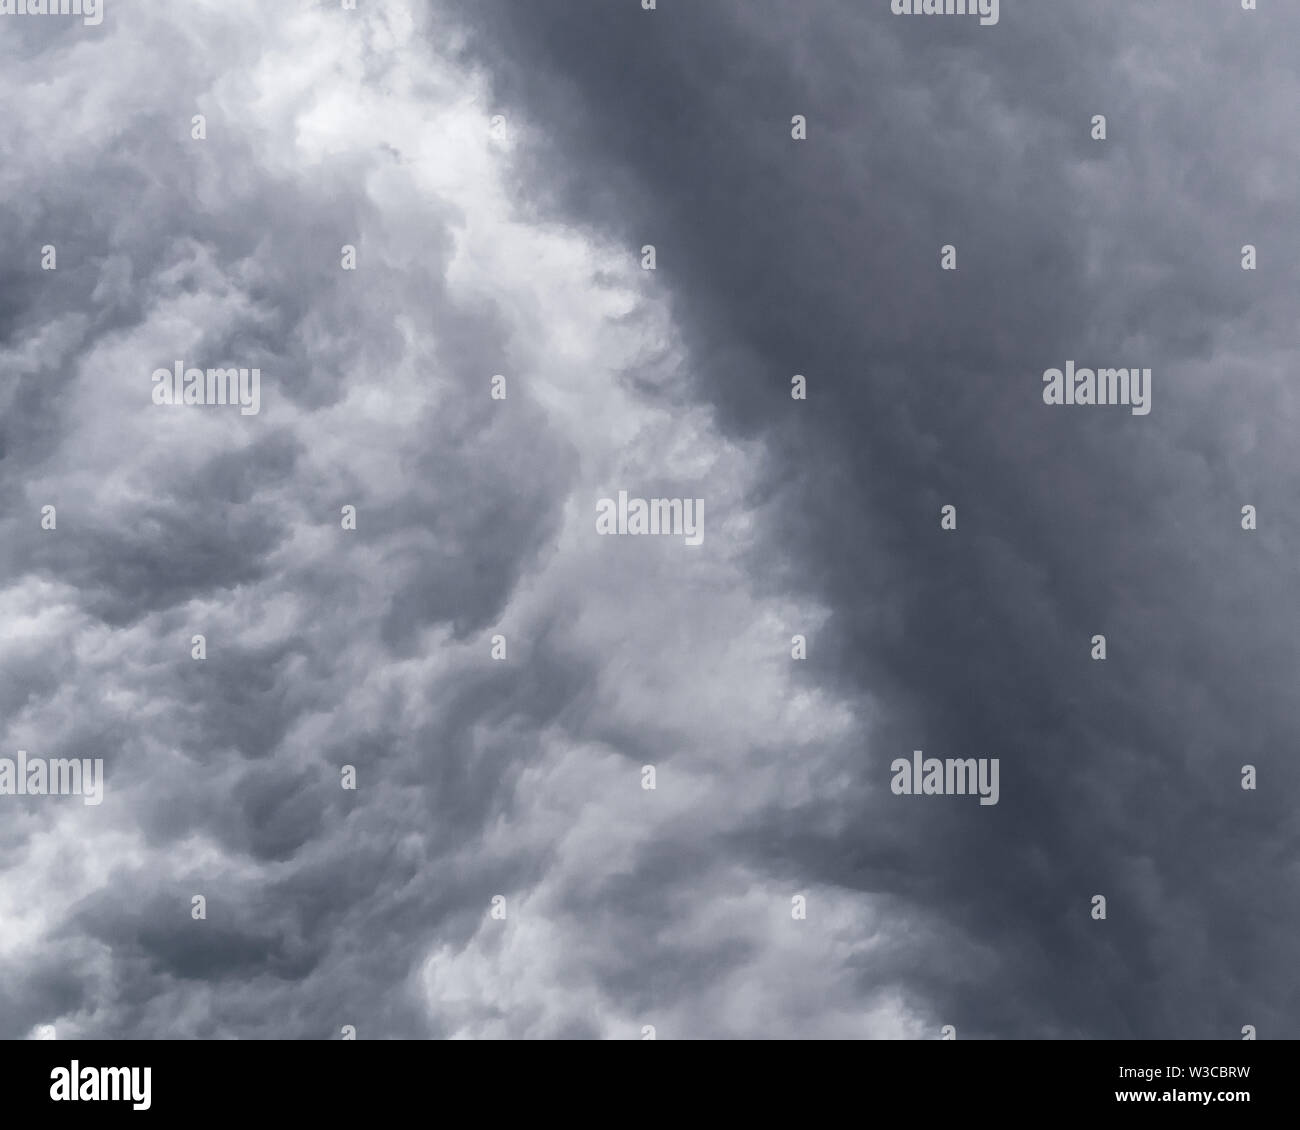 Waves of dark and white storm clouds clash in the sky creating a dramatic abstract image. Stock Photo